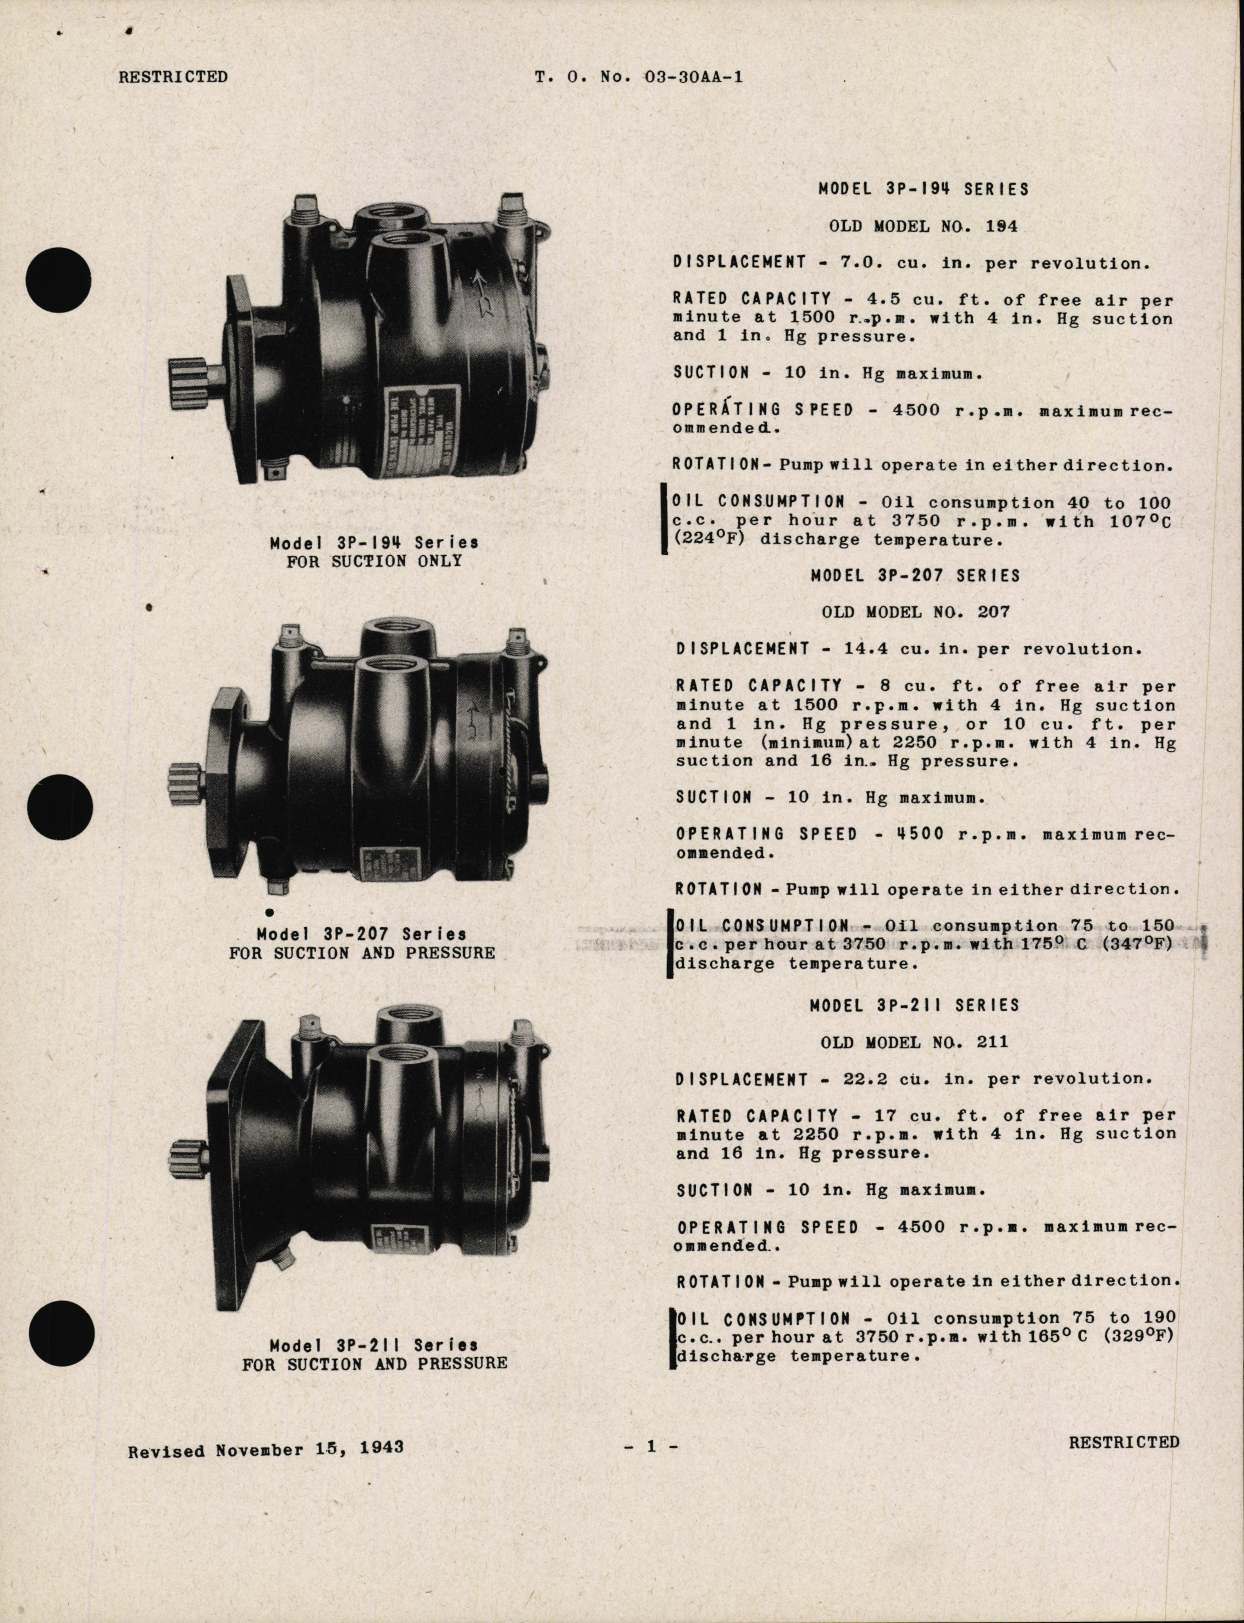 Sample page 5 from AirCorps Library document: Handbook of Instructions with Parts Catalog for Engine-Driven Vacuum Pumps